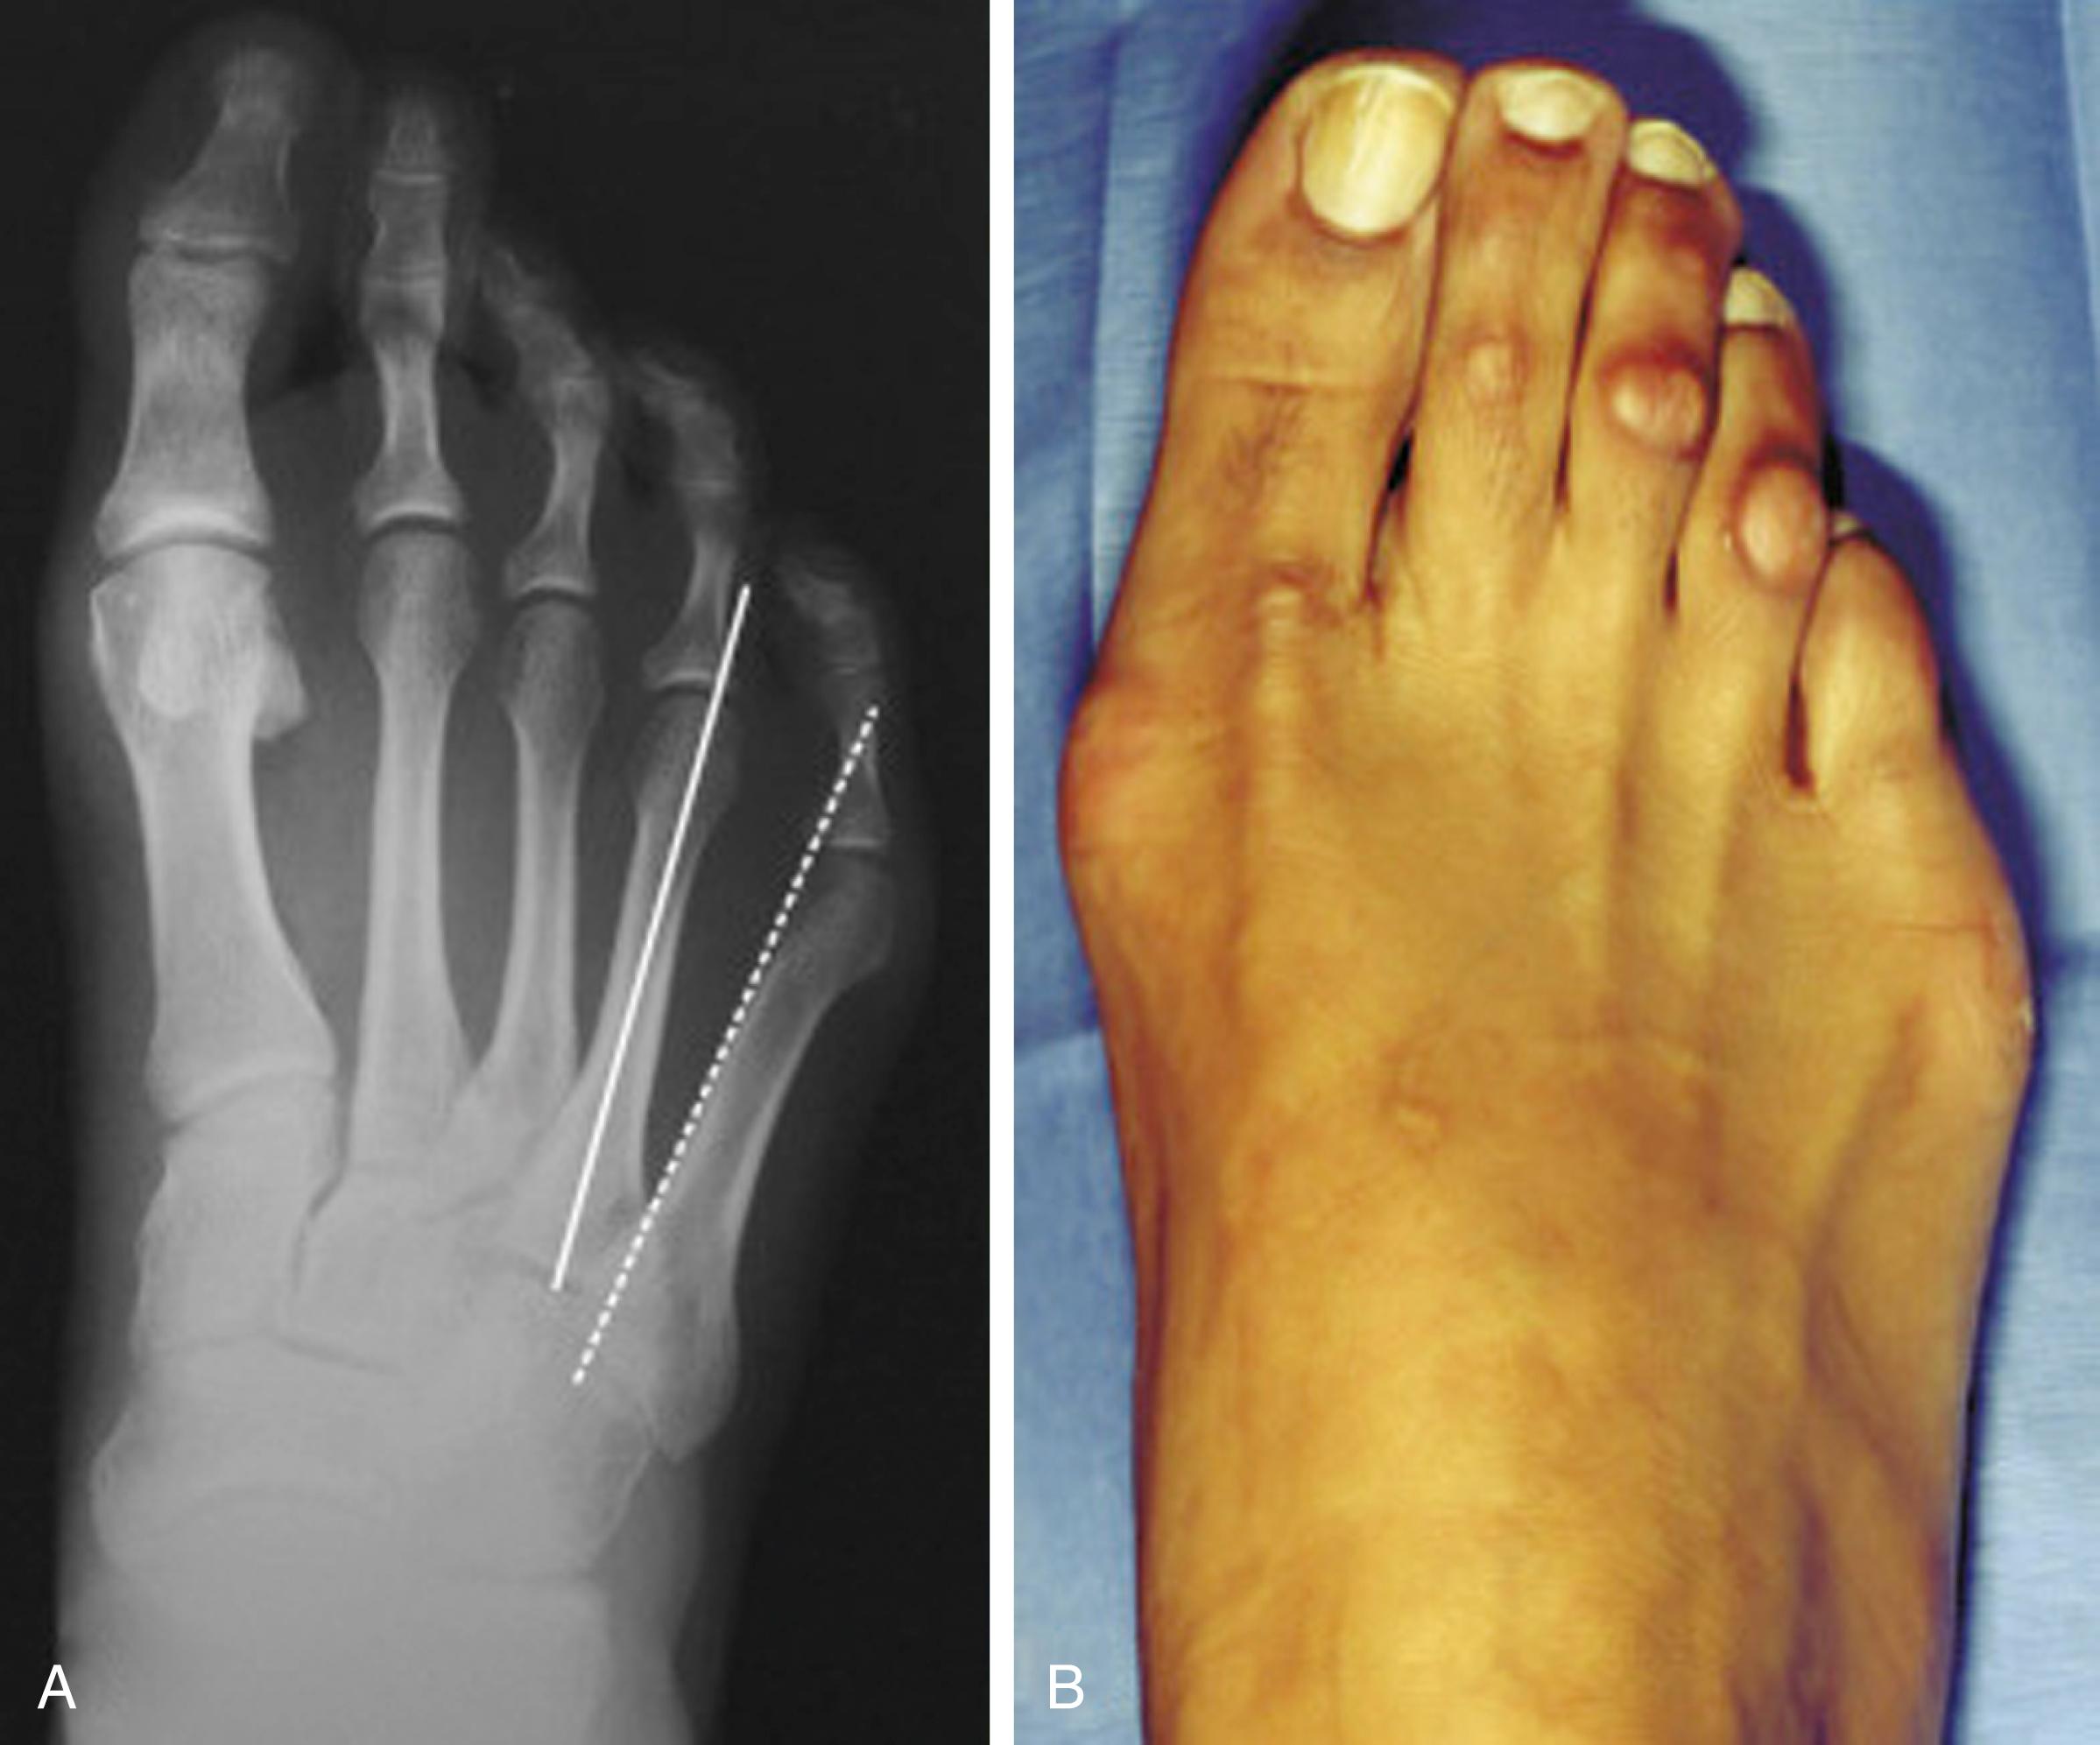 FIG. 194.1, (A) Bunionette, or Tailor’s bunion deformity, may be assessed radiographically with a lateral splaying in the distal fifth metatarsal. (B) Clinically, the patient generally presents with symptoms occurring laterally or plantar laterally, often with an adduction of the fifth toe.